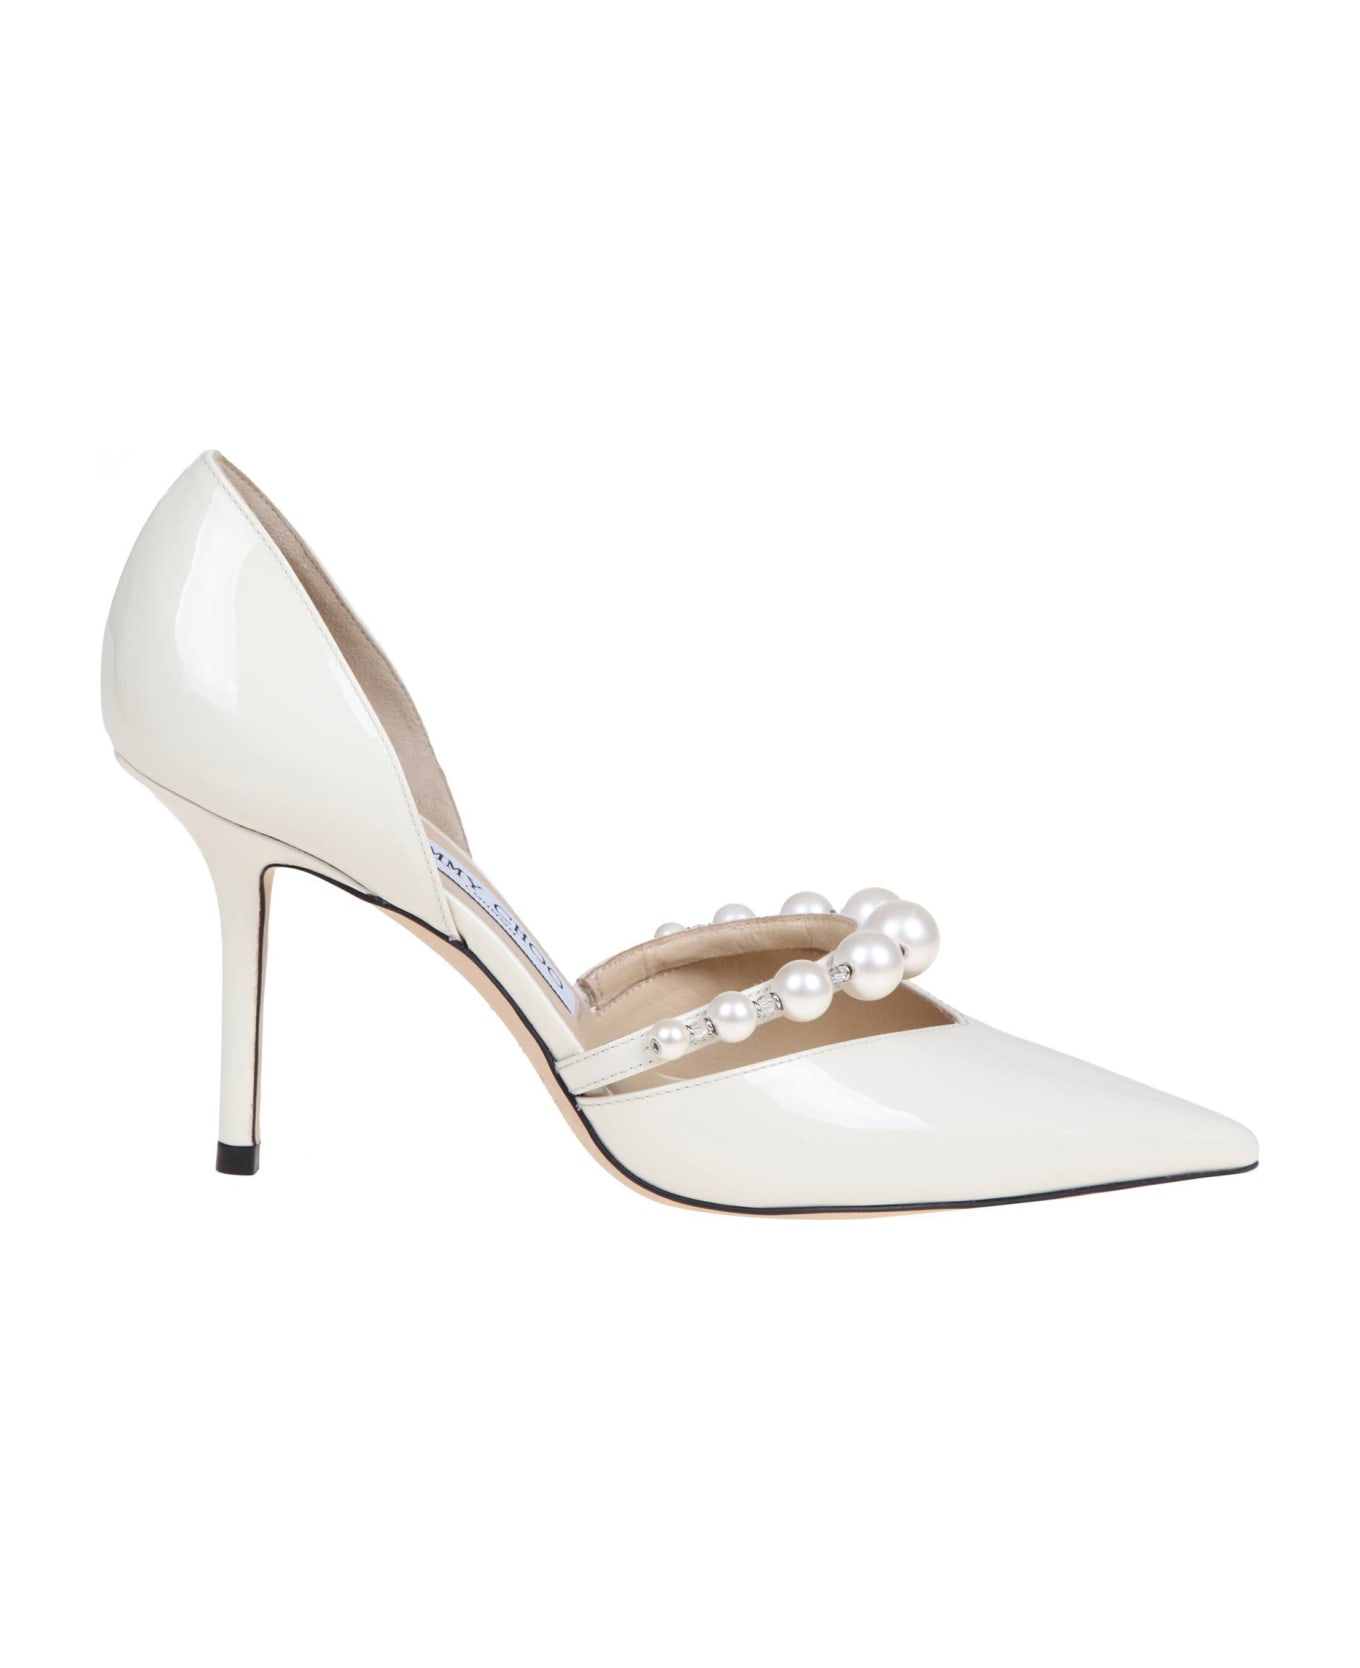 Jimmy Choo Aurelie 85 Patent Leather Pumps With Applied Pearls ハイヒール